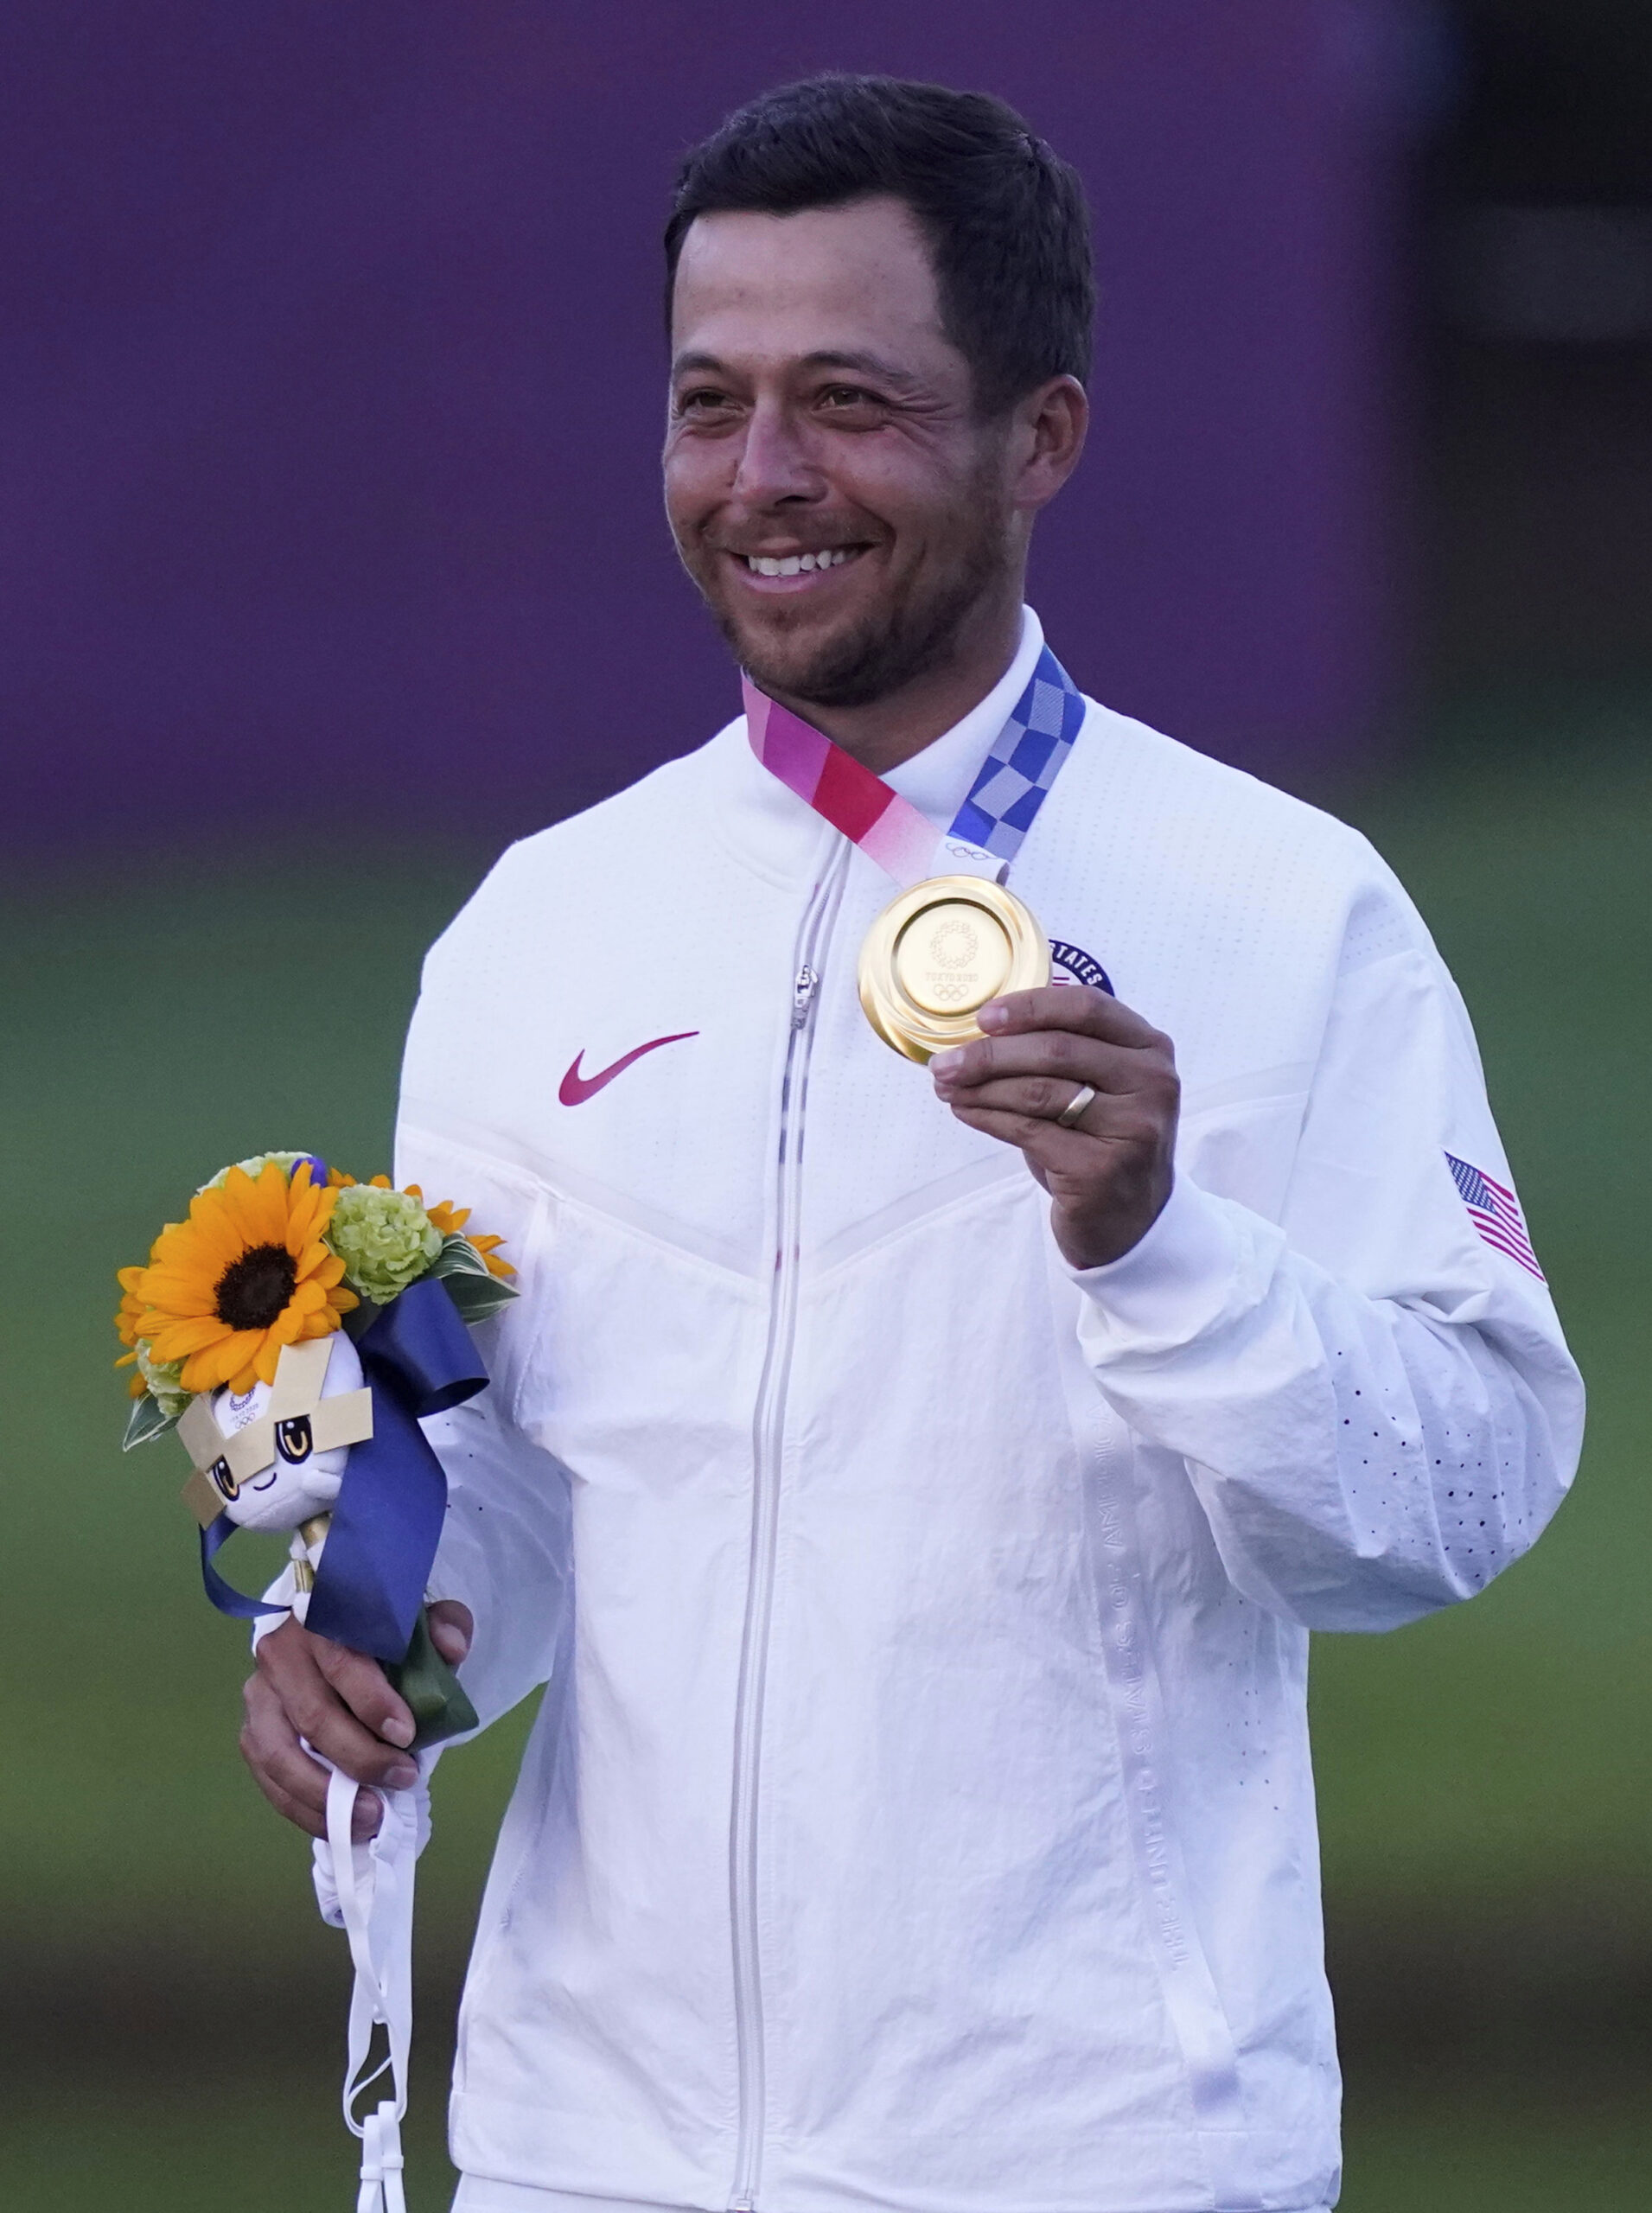 Xander Schauffele of the United States celebrates winning Gold in the Men's Golf event at the 2020 Summer Olympics